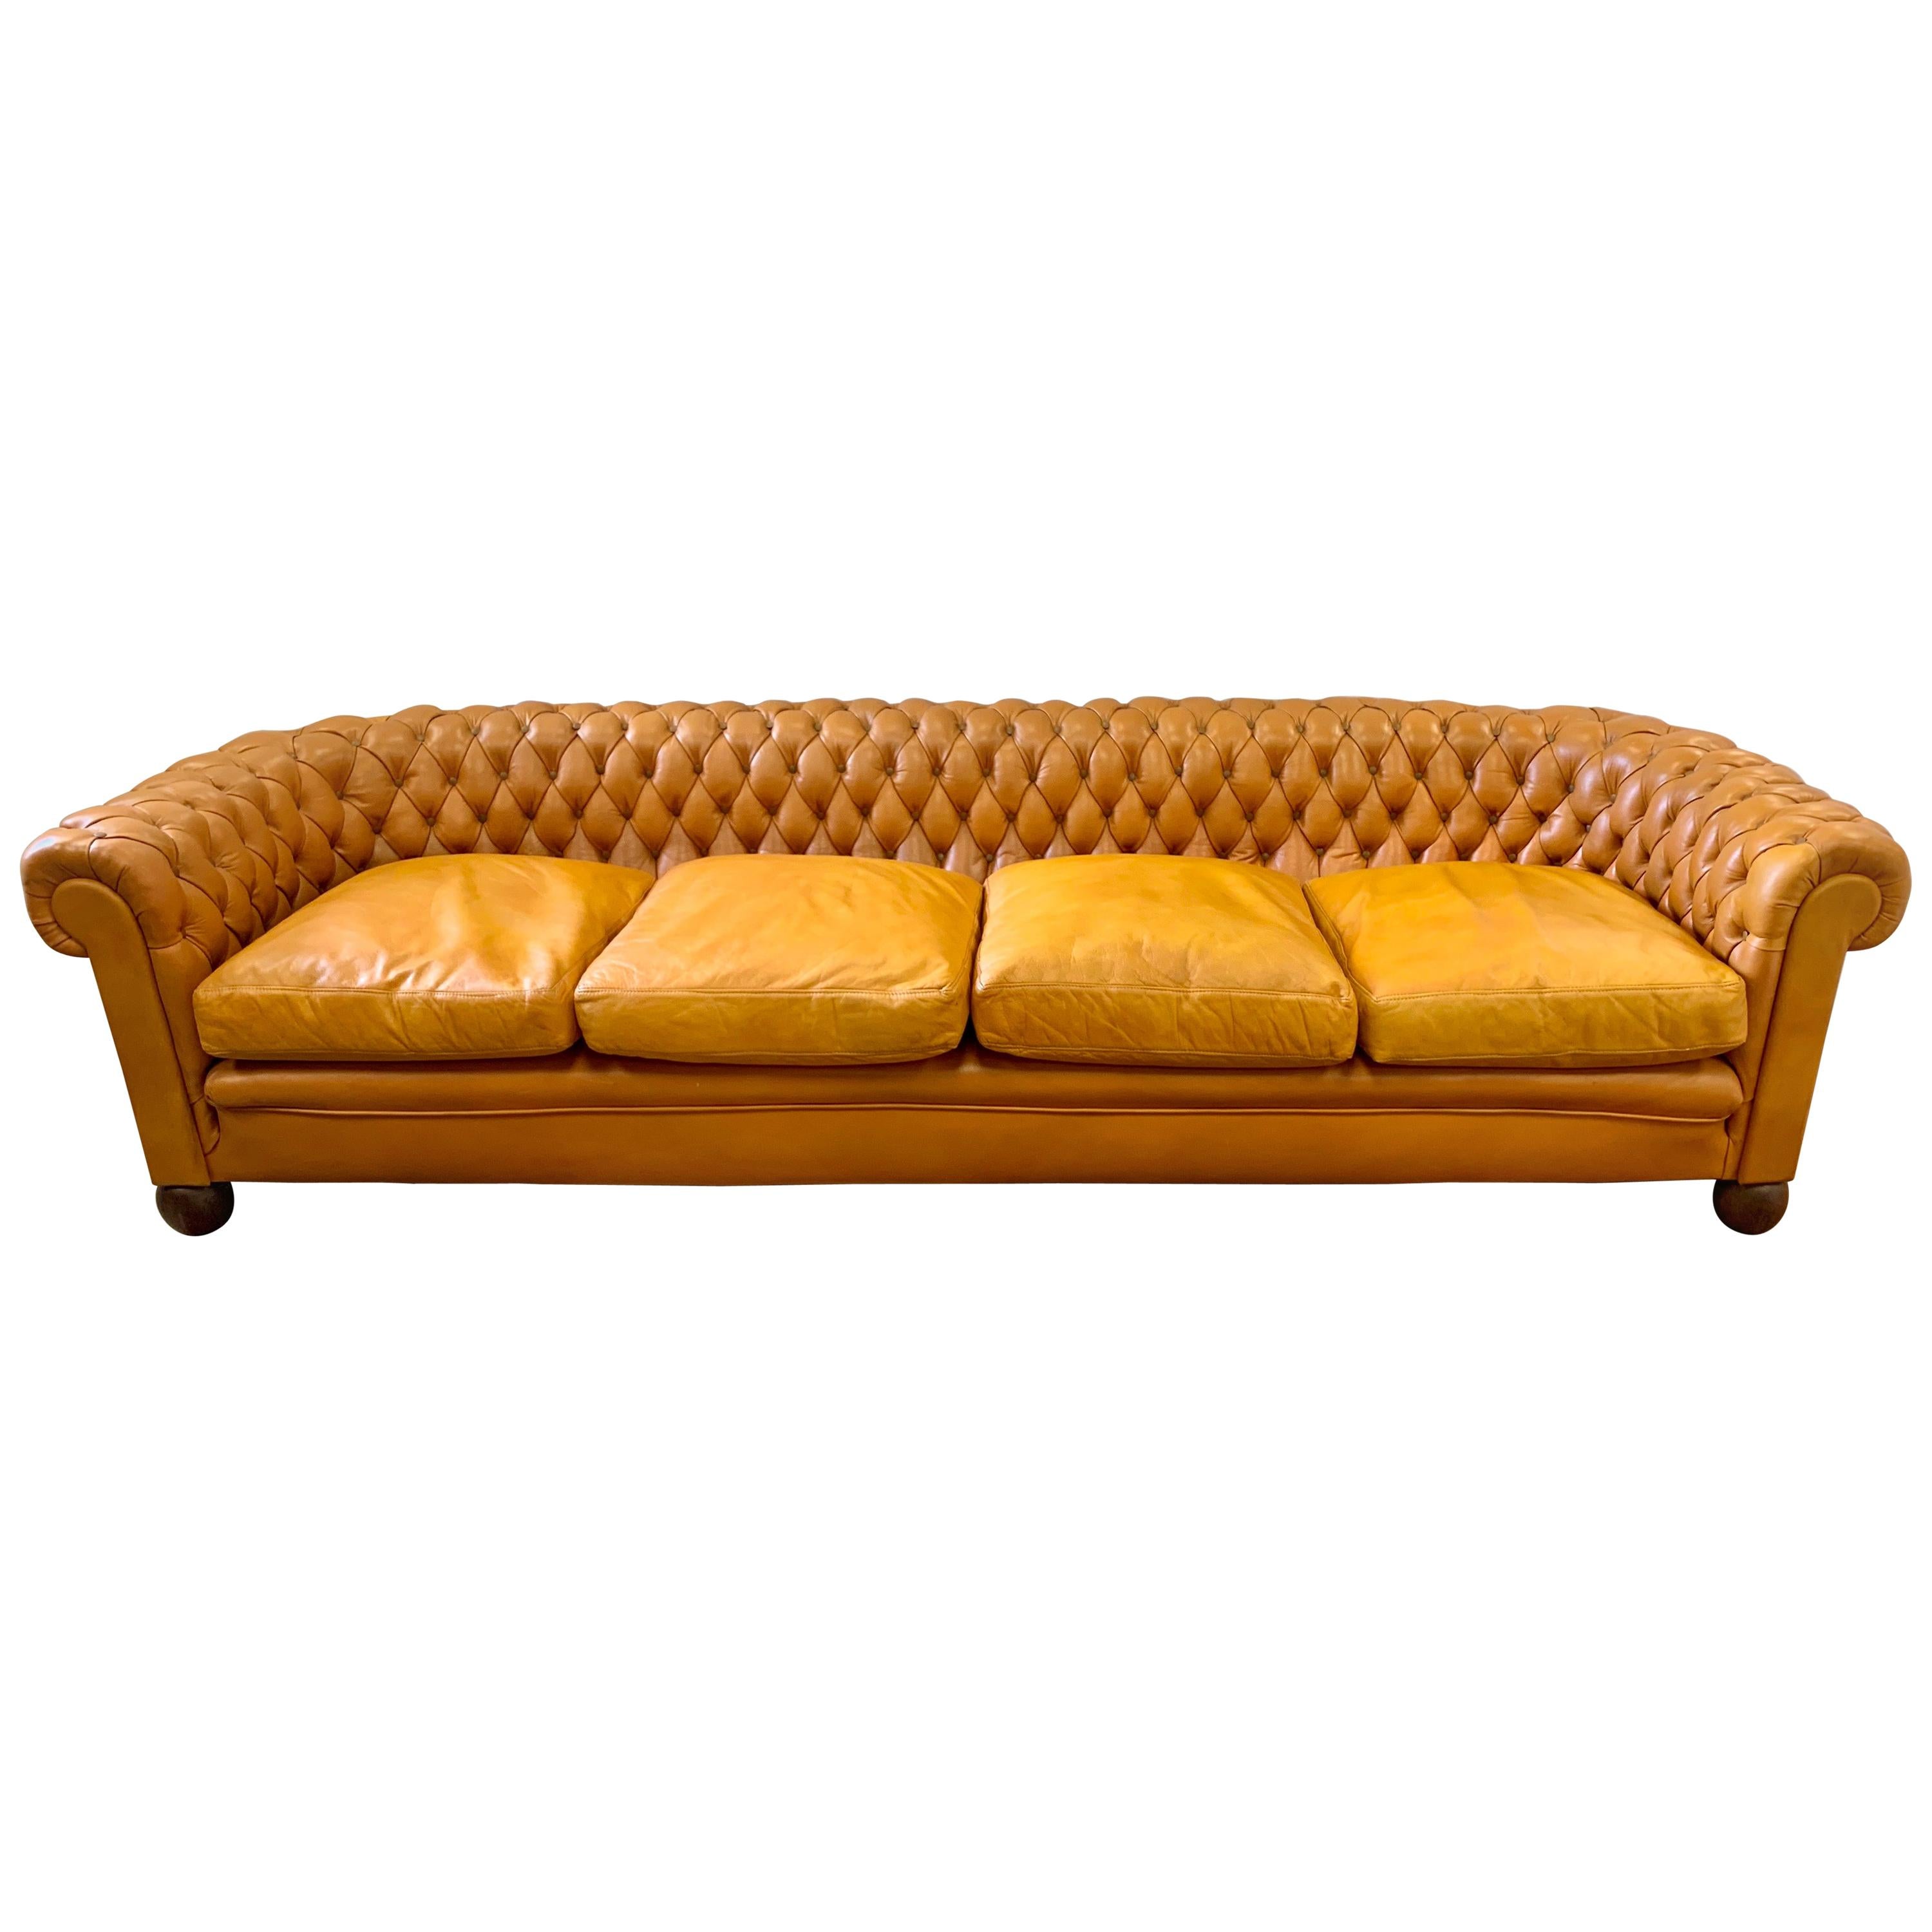 Extra Large English Leather Tufted Chesterfield Sofa